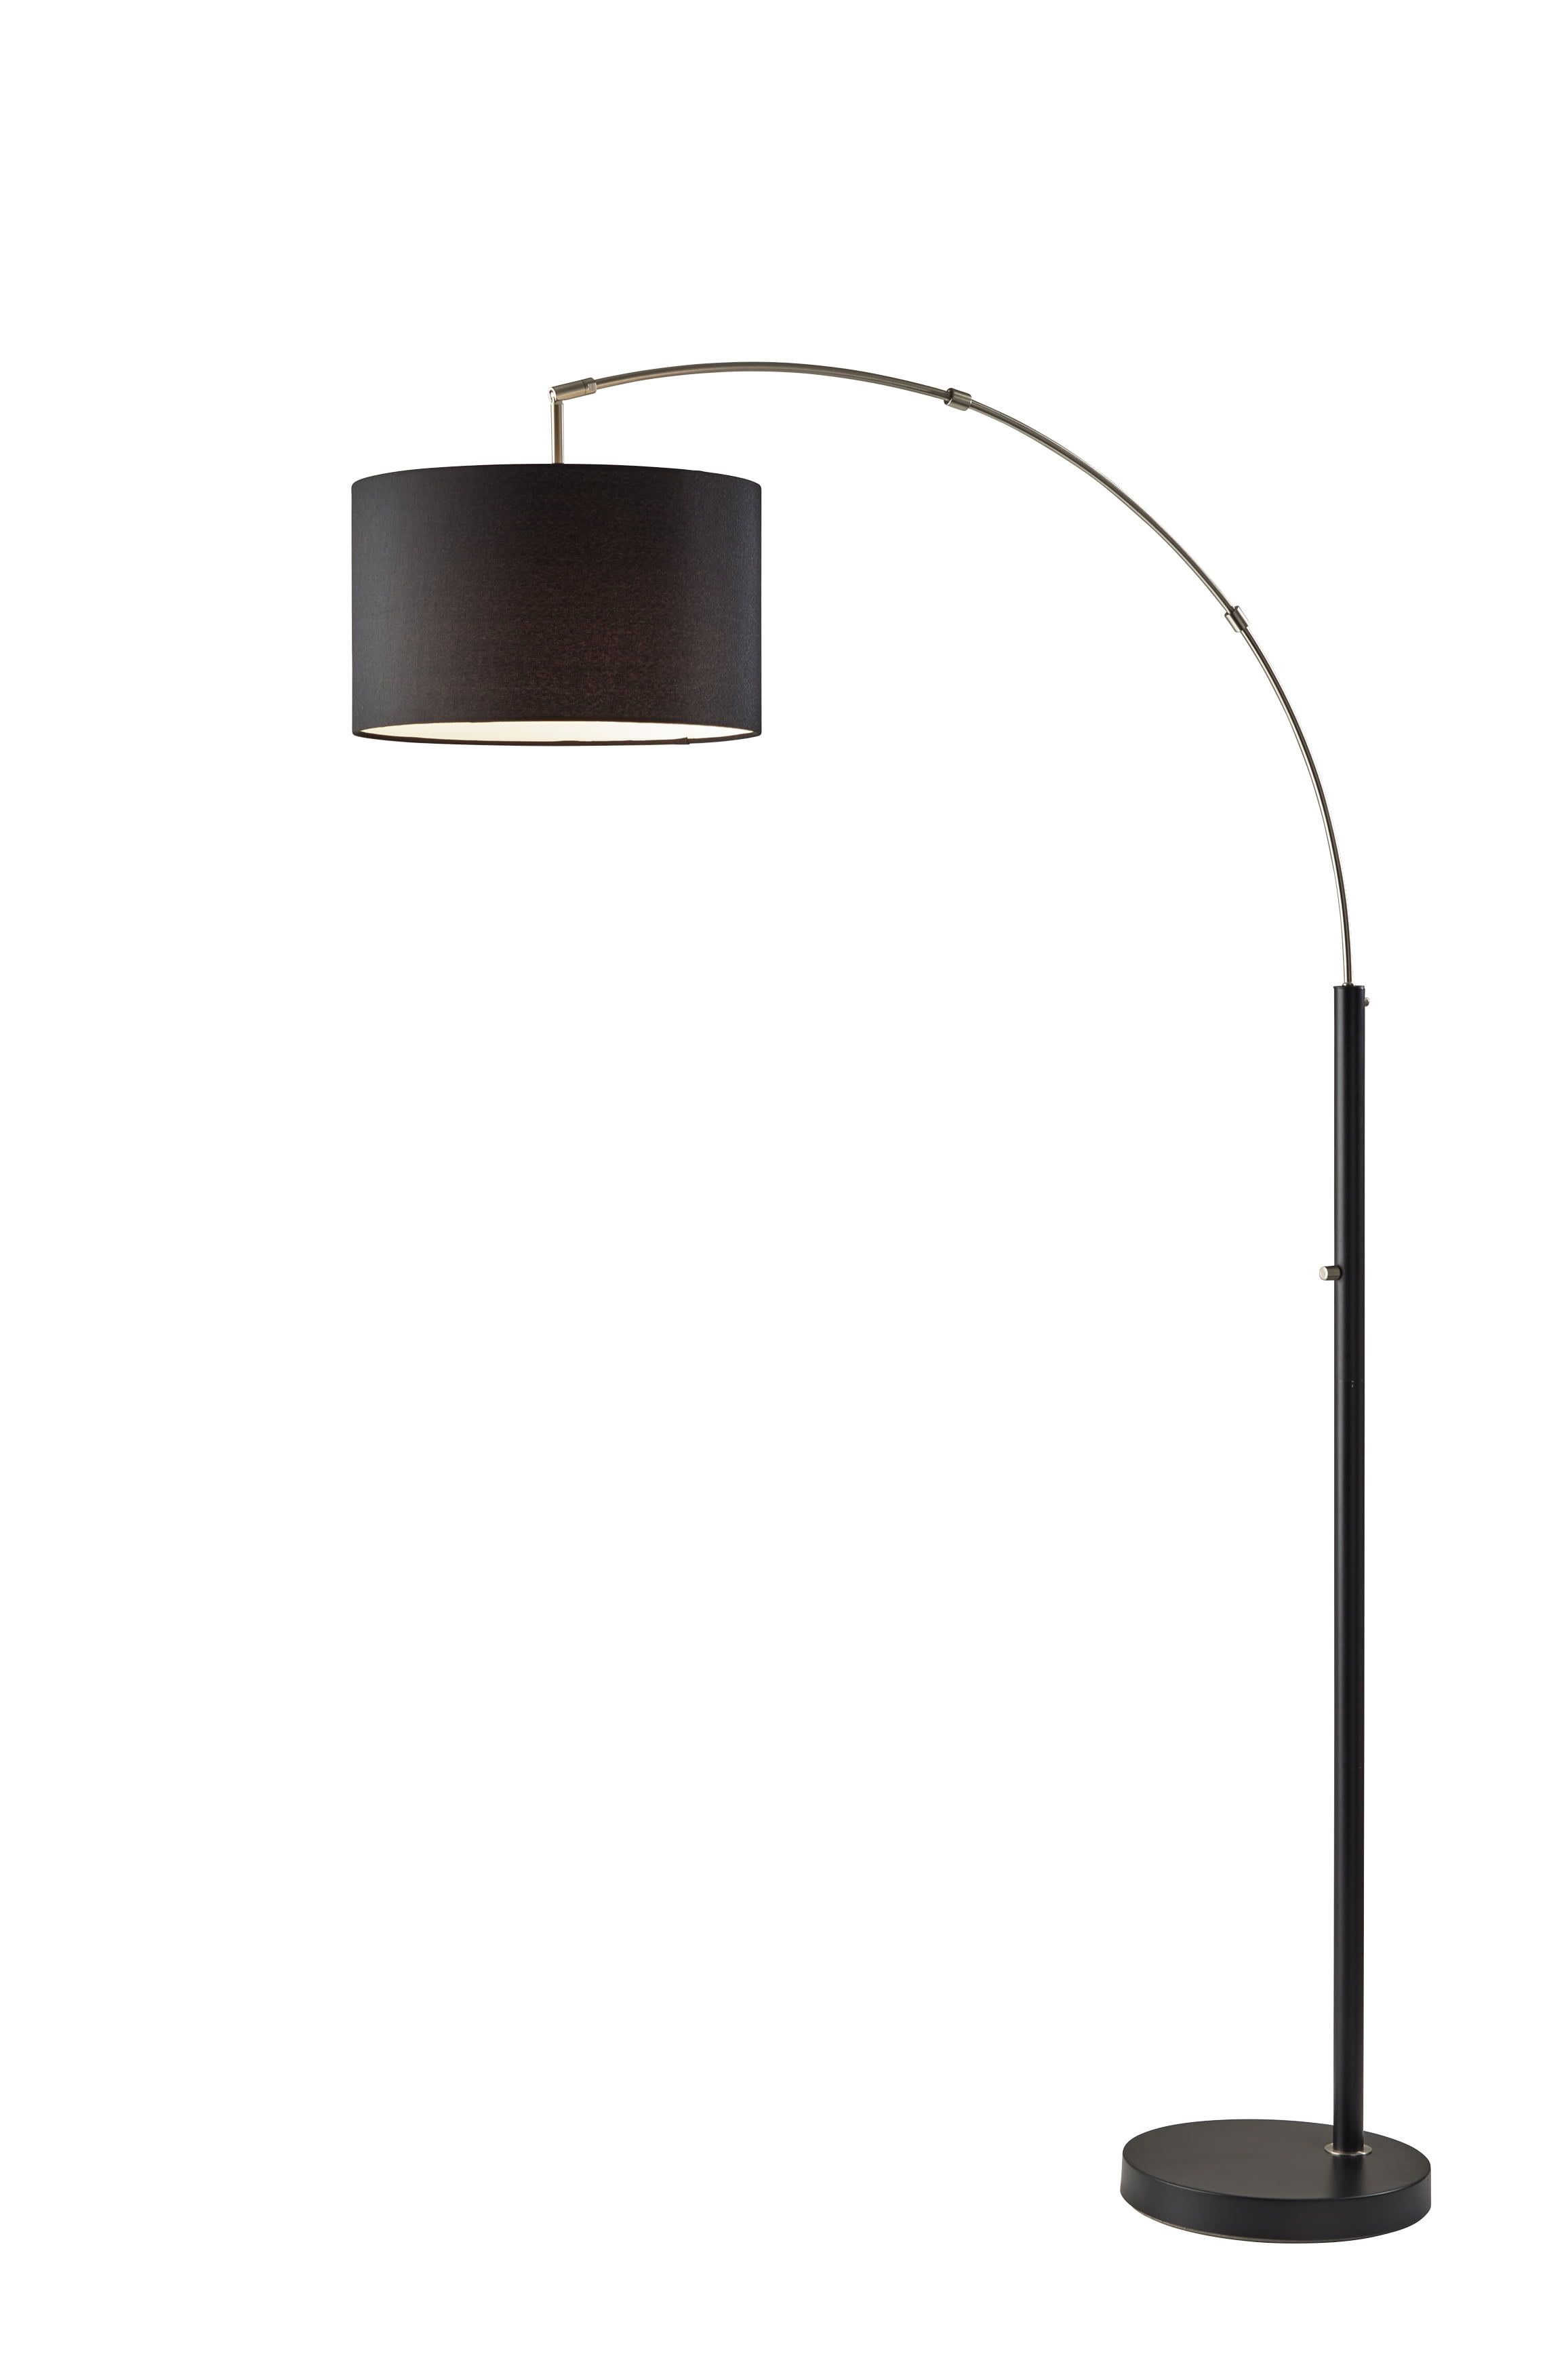 Modern Black Adjustable Arc Floor Lamp with Recycled Fabric Shade